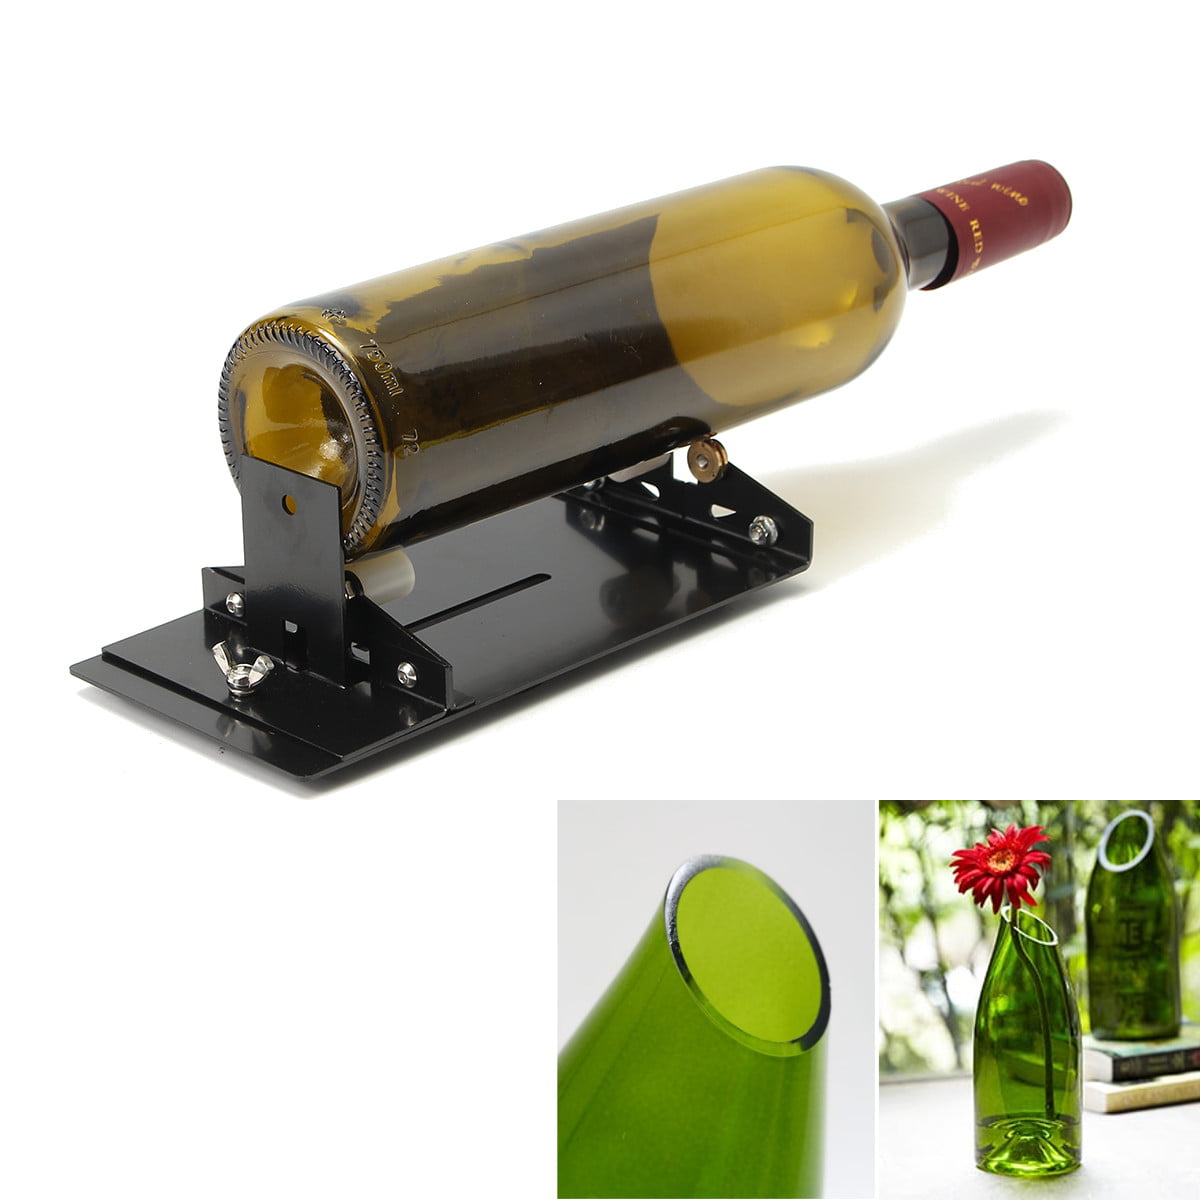 Glass Wine Beer Bottle Cutter Cutting Machine Art Crafts Recycle DIY Tool Kit 